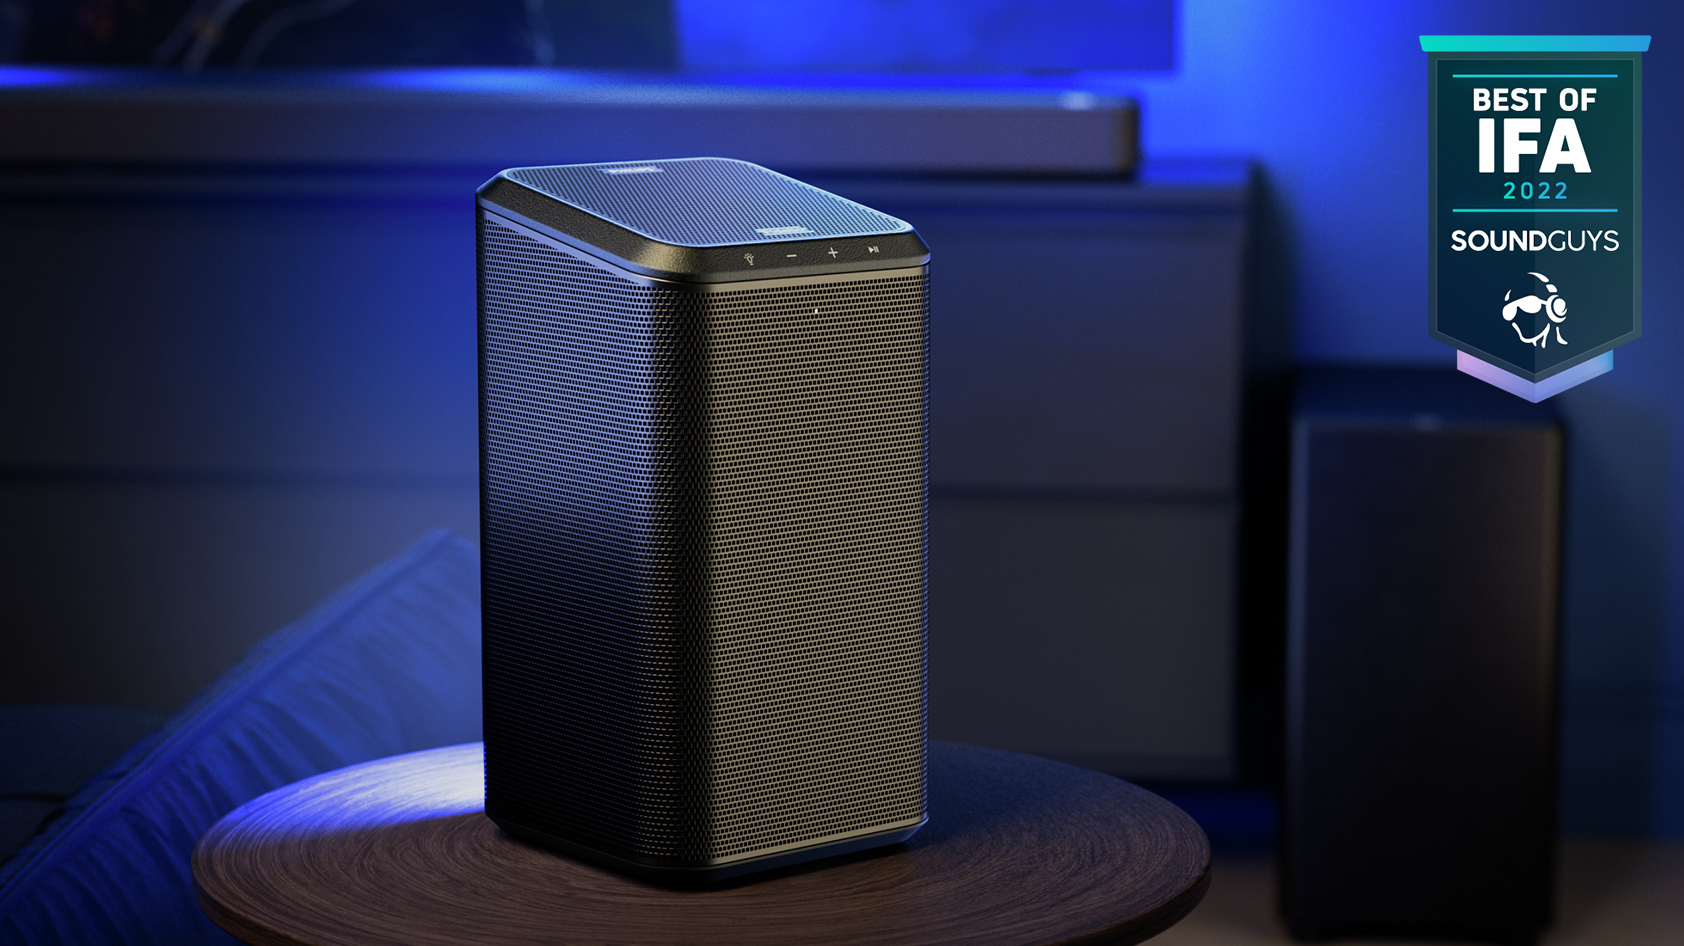 The Philips FS! Bluetooth speaker turned to a three-quarters view with a blue background.